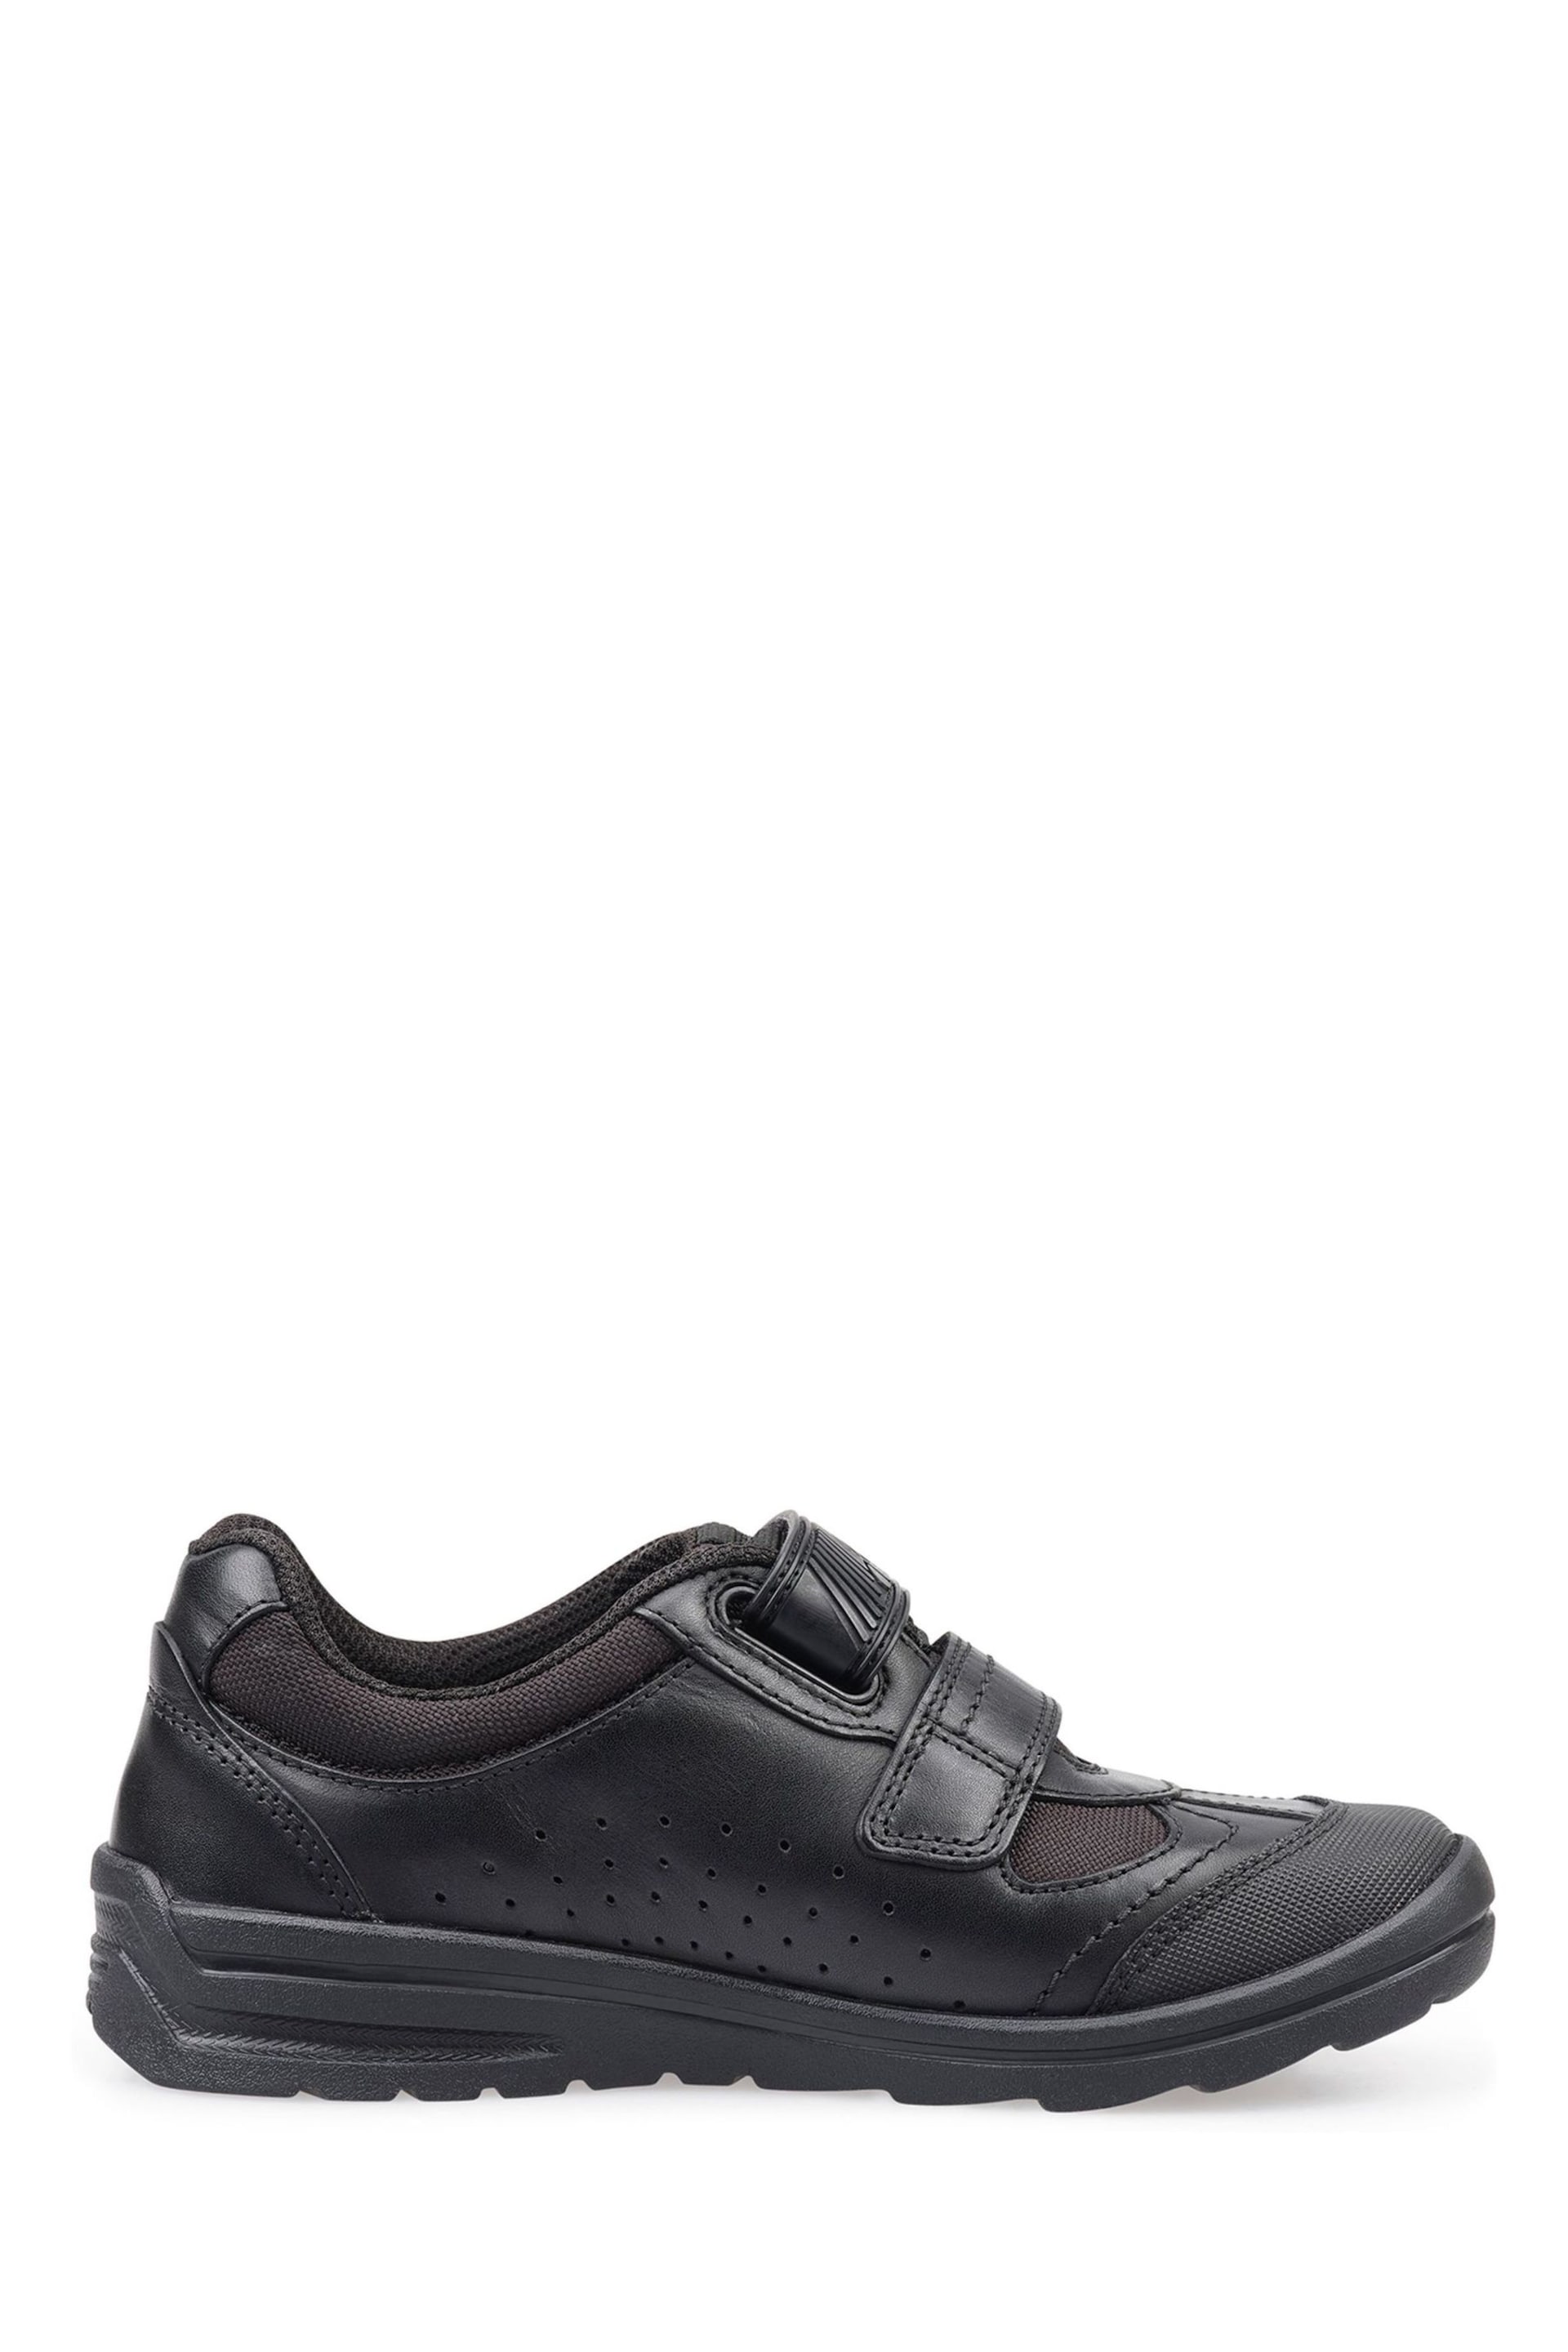 Start-Rite Rocket Black Leather School Shoes Wide Fit - Image 2 of 7